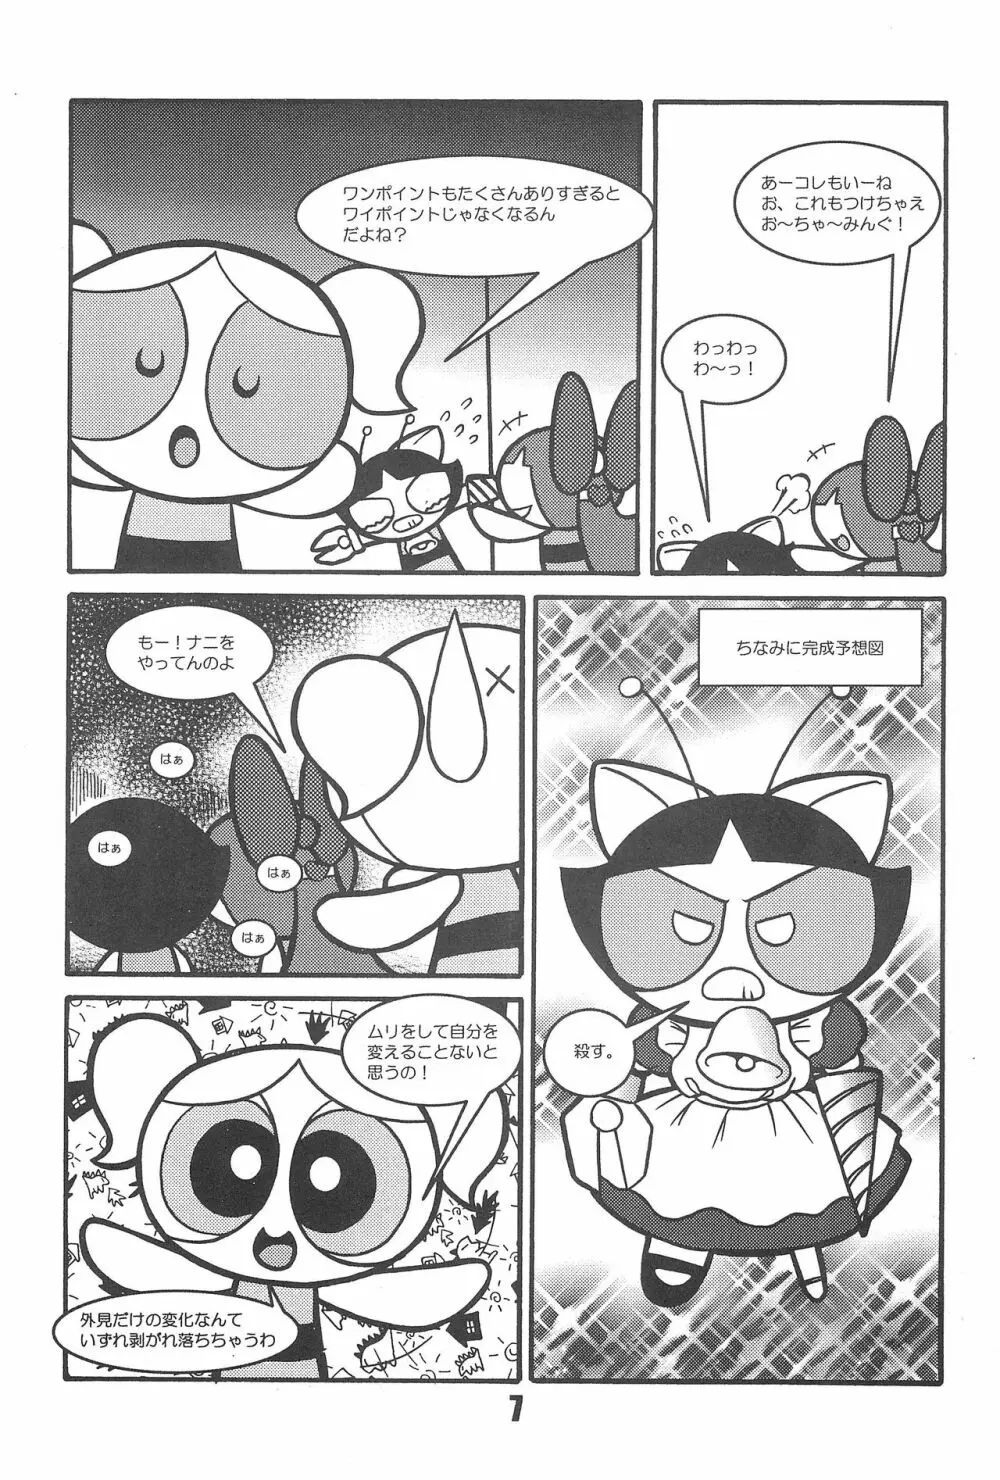 Show Goes On! Funhouse 22th Page.7